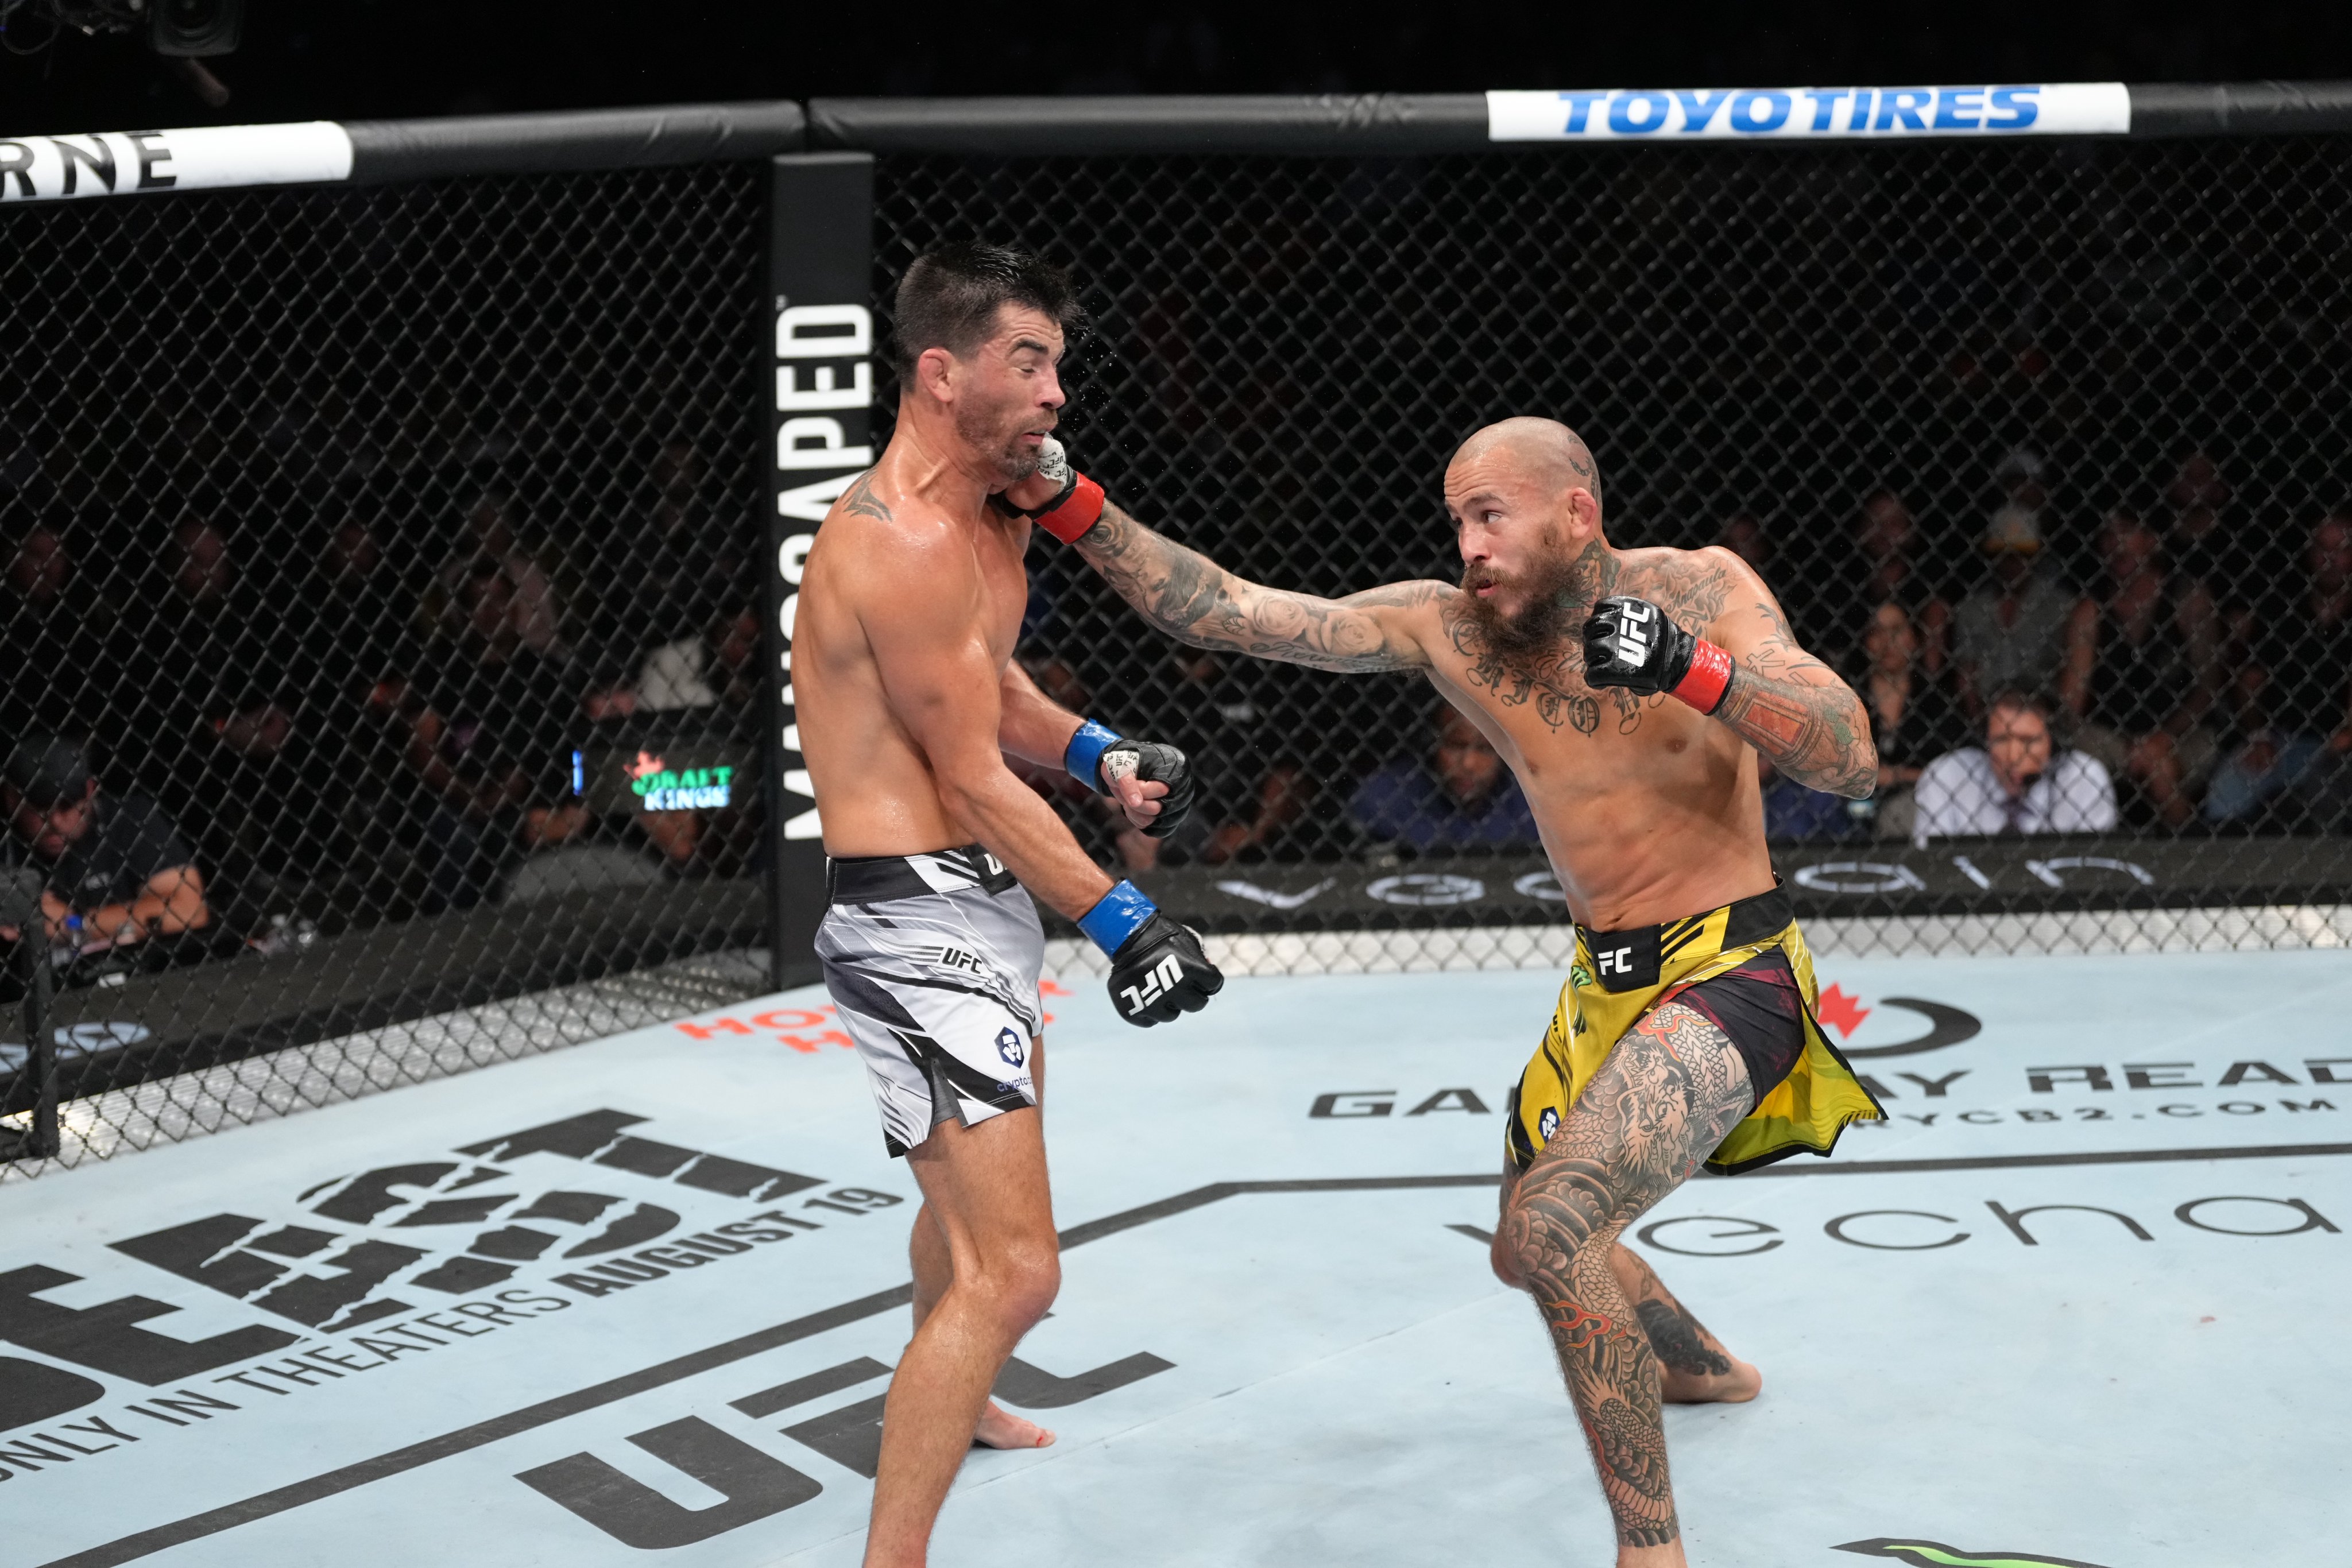 UFC San Diego Results: HIGHLIGHT REEL KNOCKOUT, Marlon 'Chito' Vera finishes Bantamweight GOAT Dominick Cruz in the fourth round